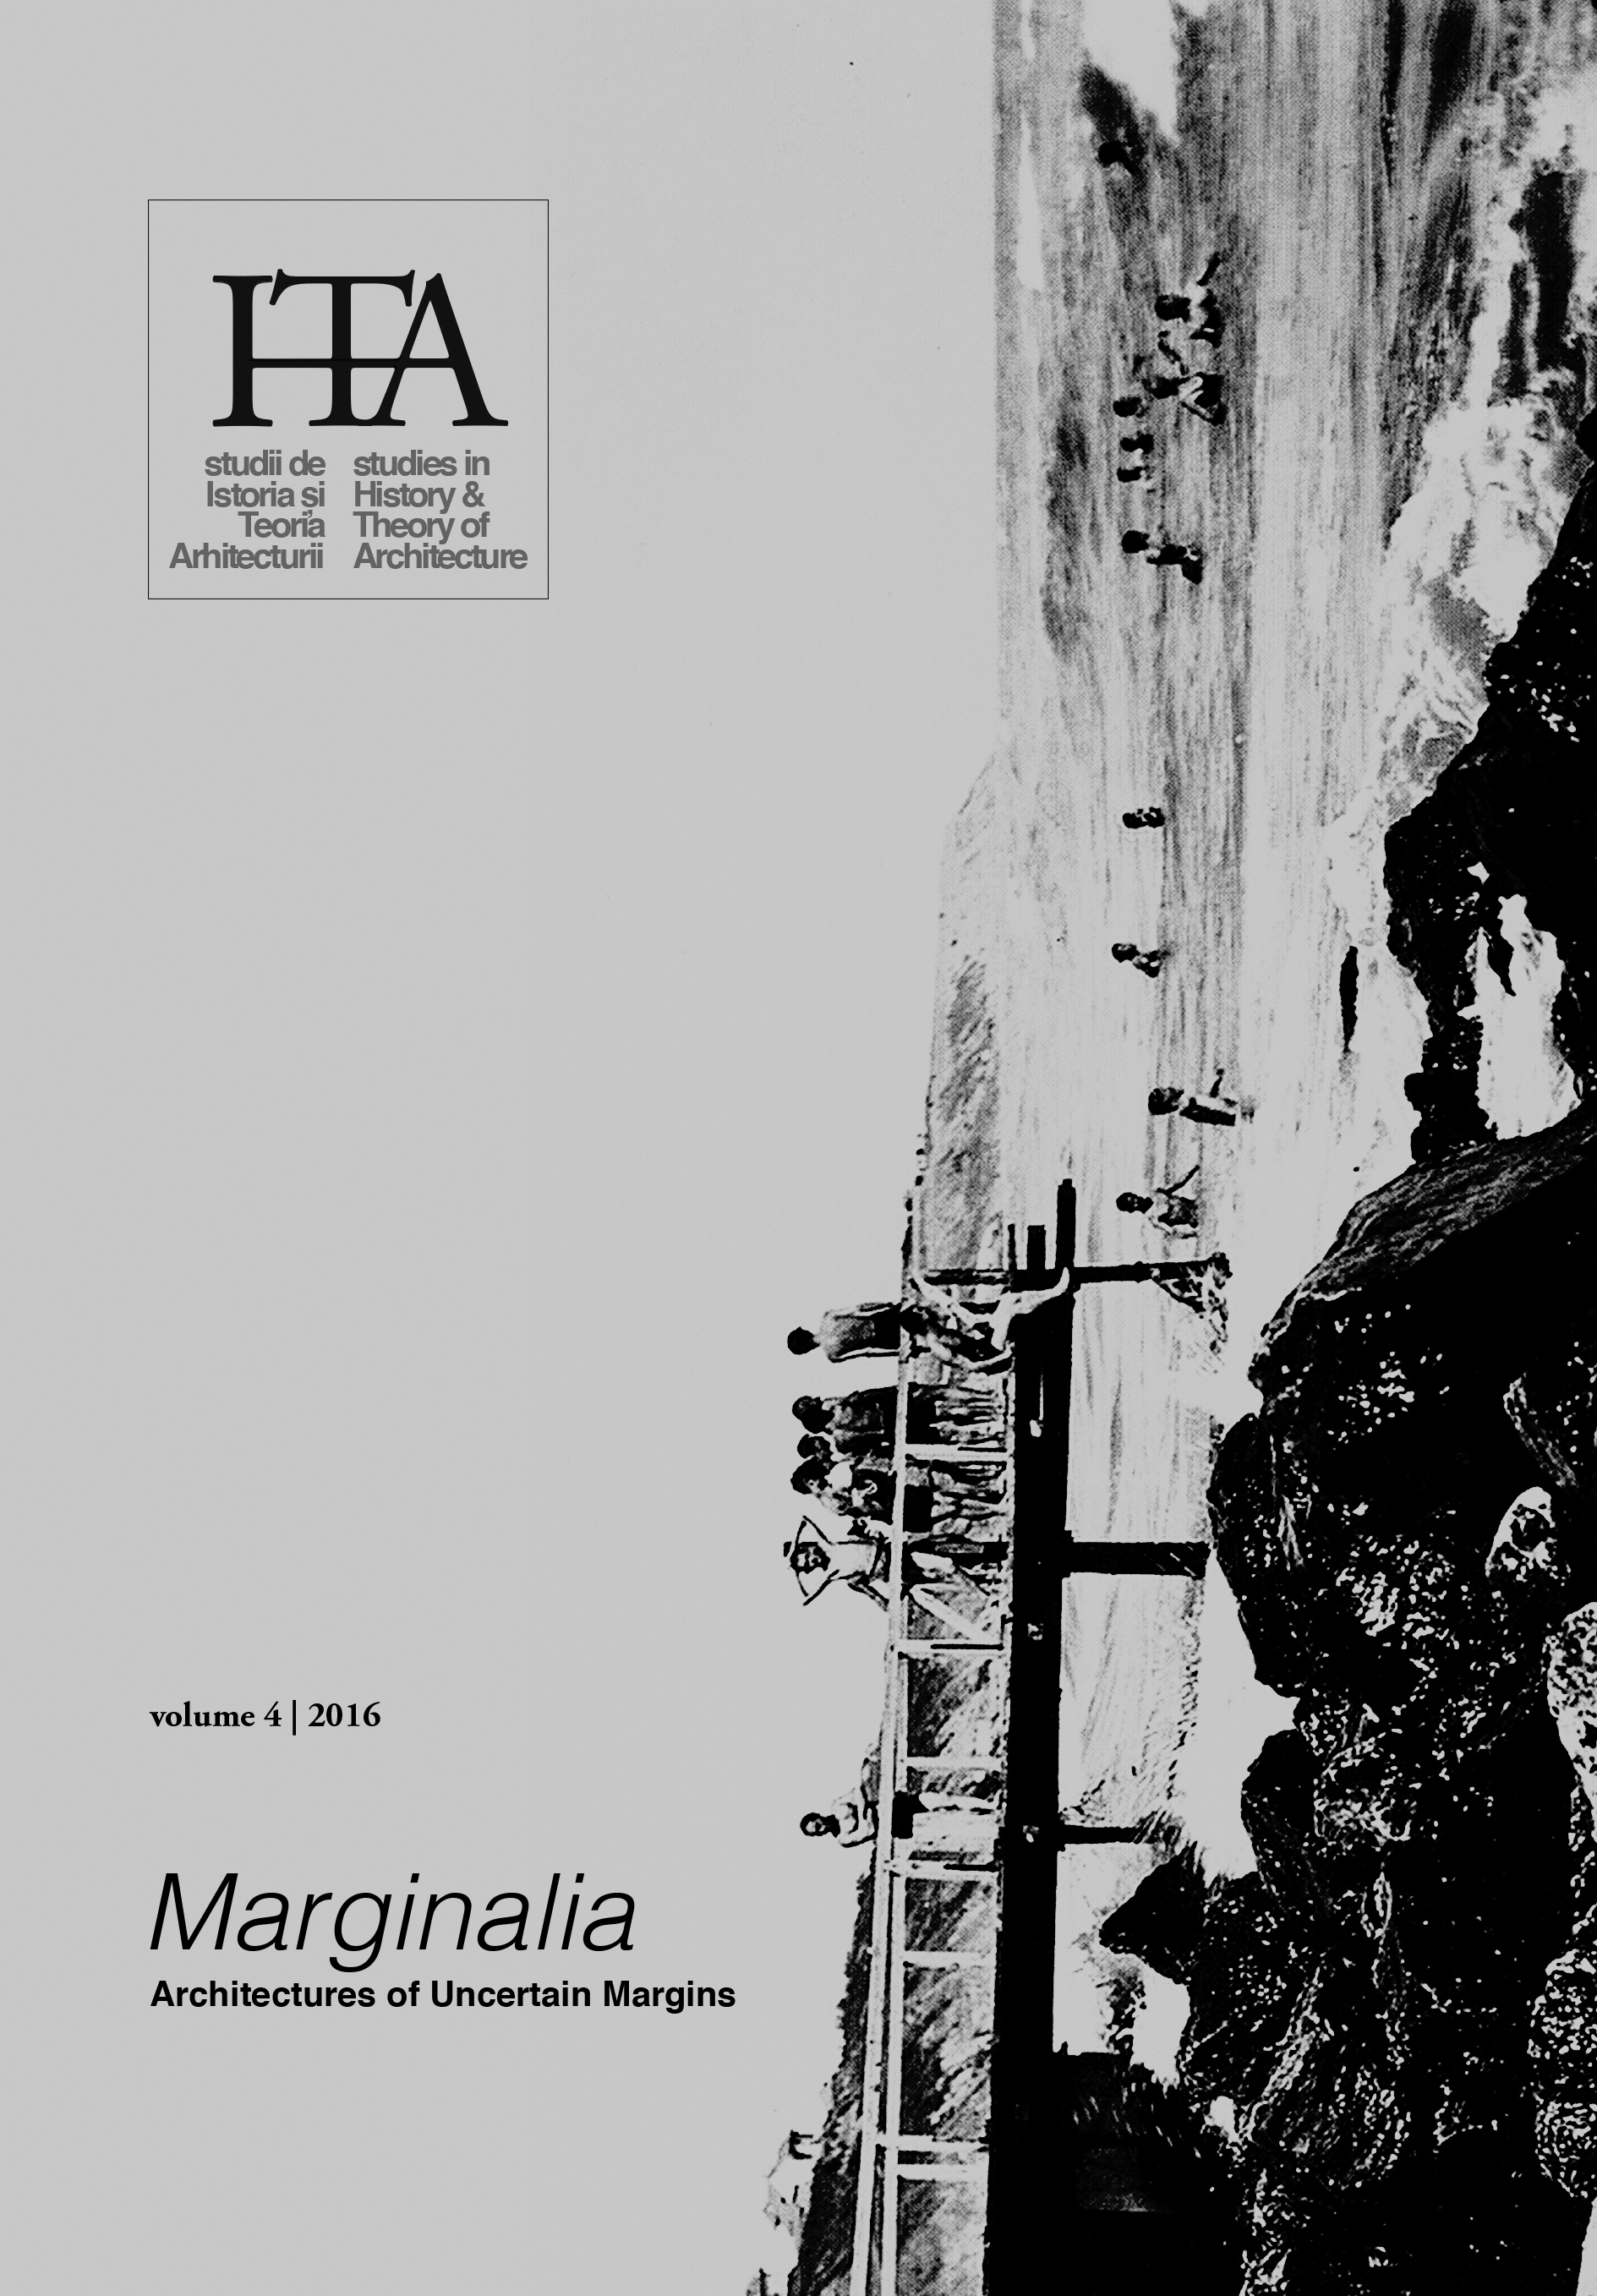 The Monastery of Curtea de Argeș and Romanian Architectural Heritage in the Late 19th Century Cover Image